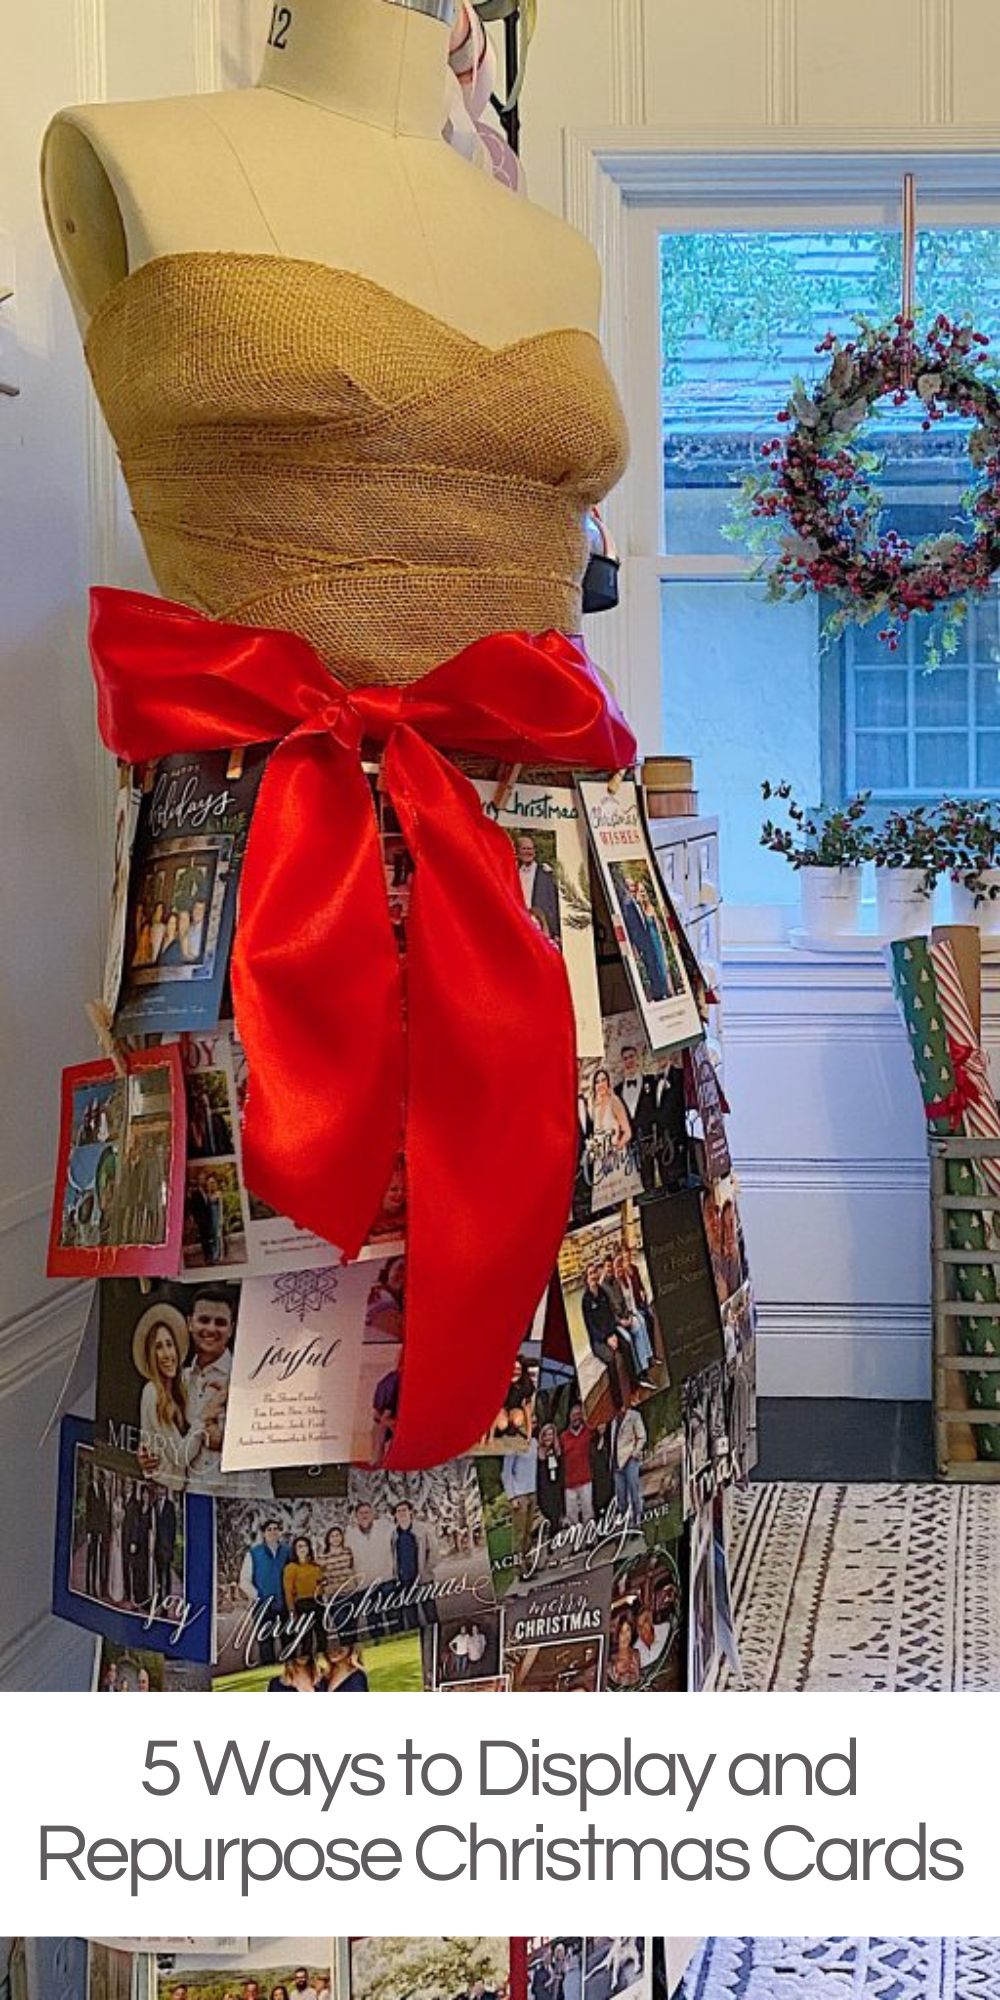 https://my100yearoldhome.com/wp-content/uploads/2023/12/5-Ways-to-Display-and-Repurpose-Christmas-Cards-2.jpg